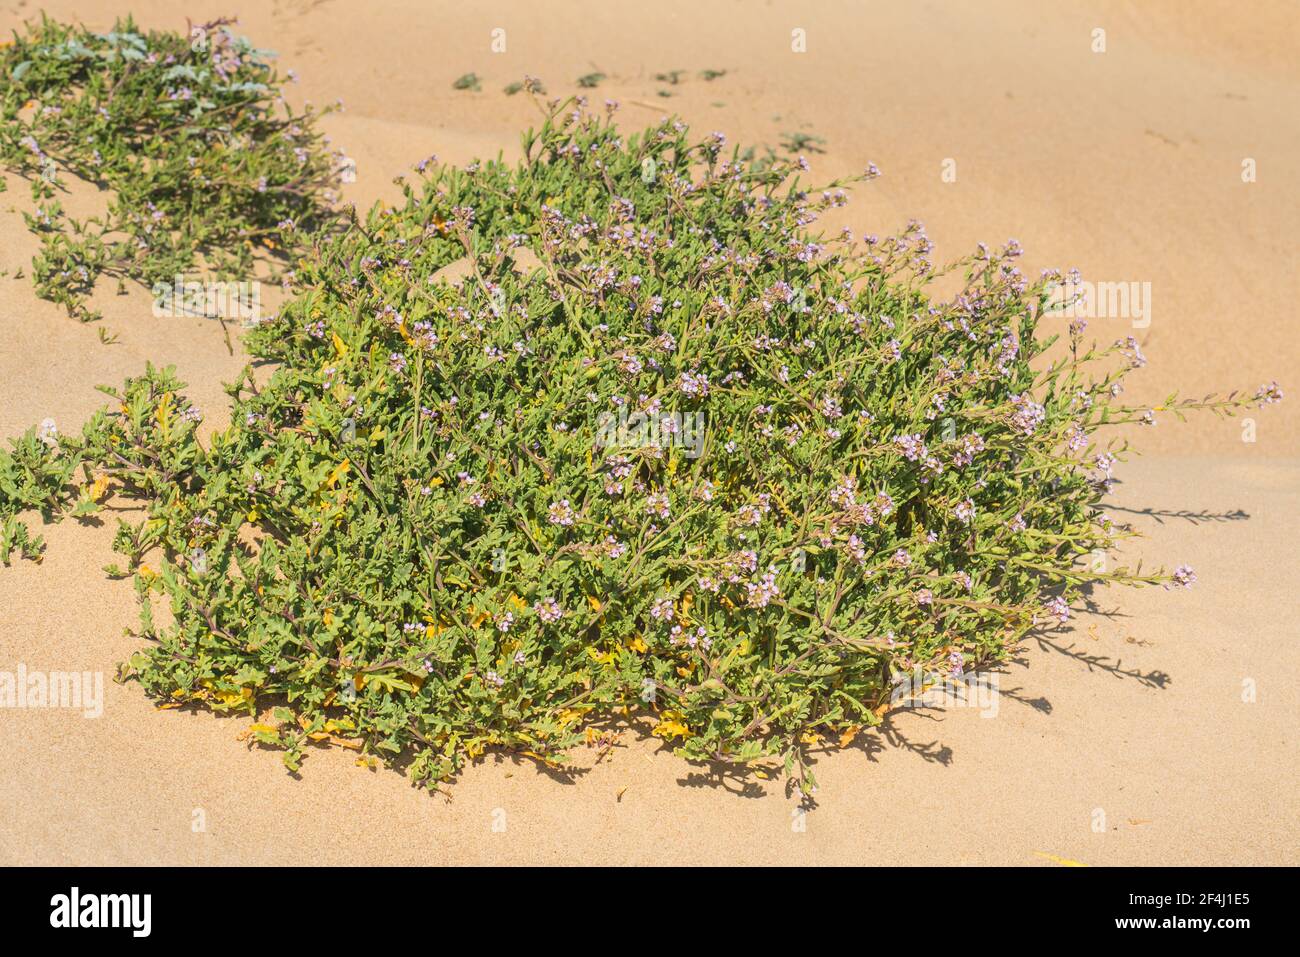 Wildflowers growing on the sandy beach. Sea Rocket flowers in bloom. Sea Rocket is a succulent - a low growing plant commonly found near sea or ocean. Stock Photo